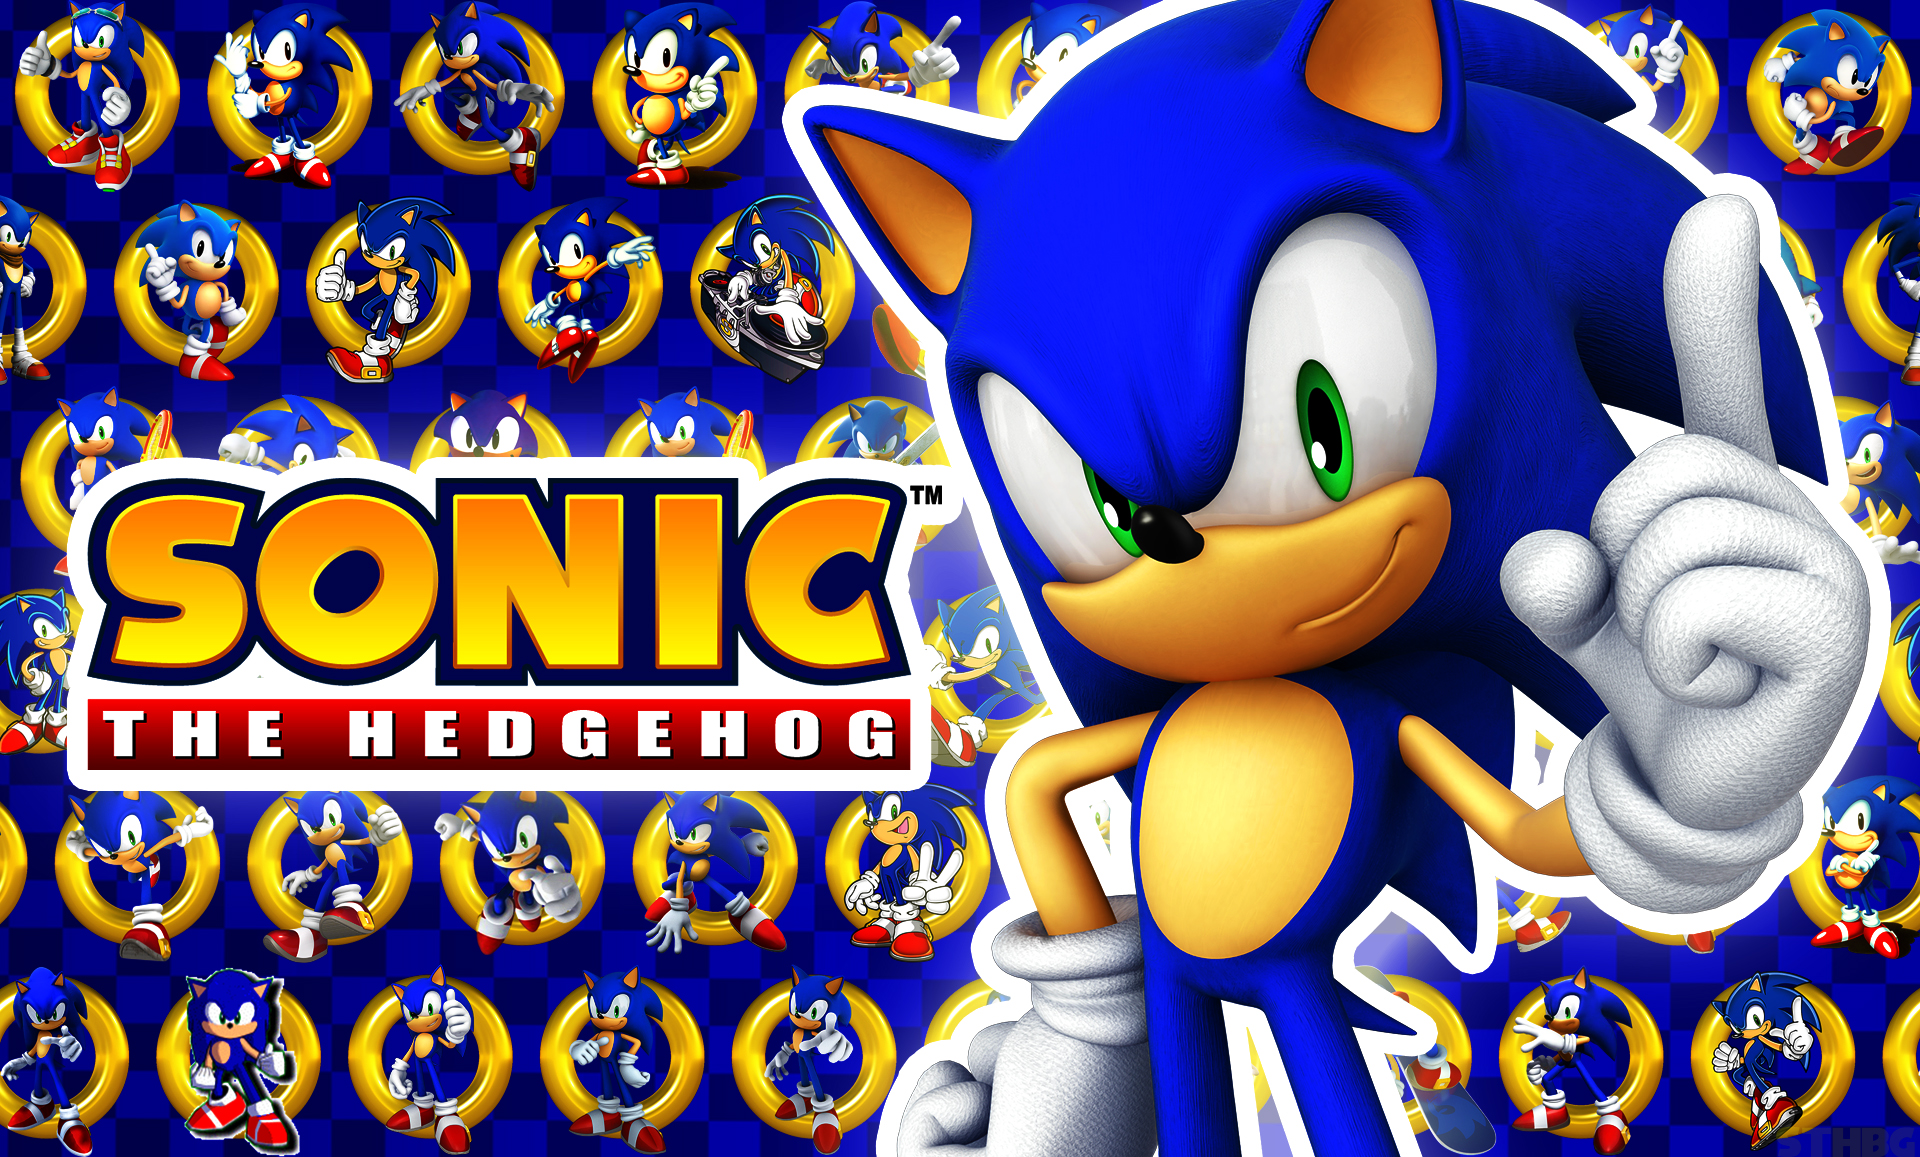 General 1920x1157 Sonic Sonic the Hedgehog logo Sega video games writing text video game characters